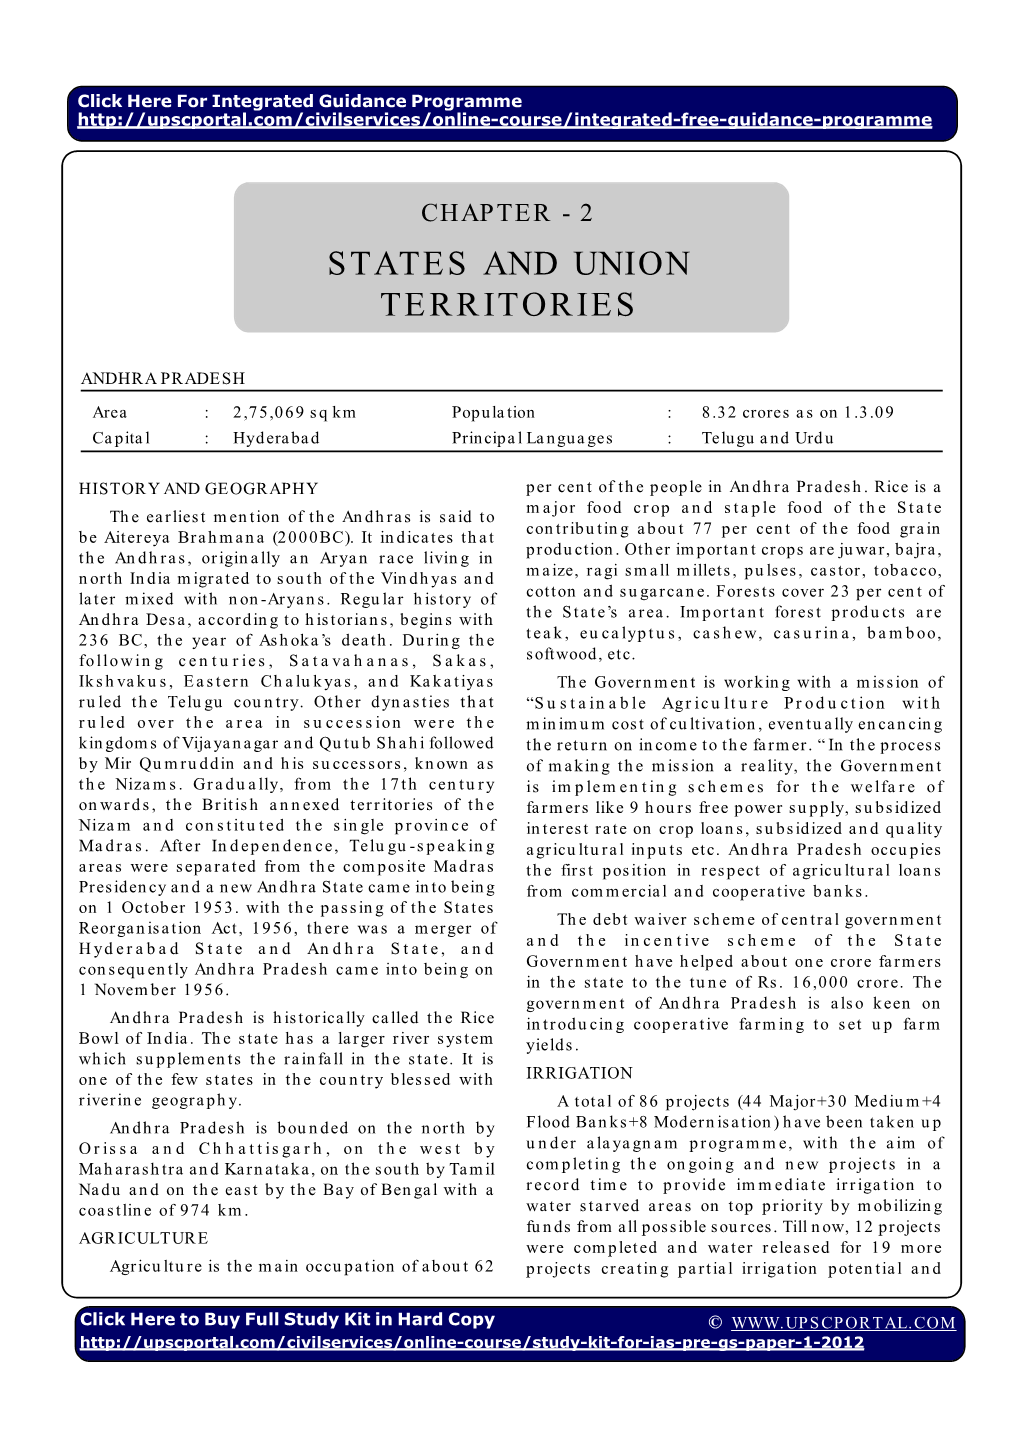 States and Union Territories